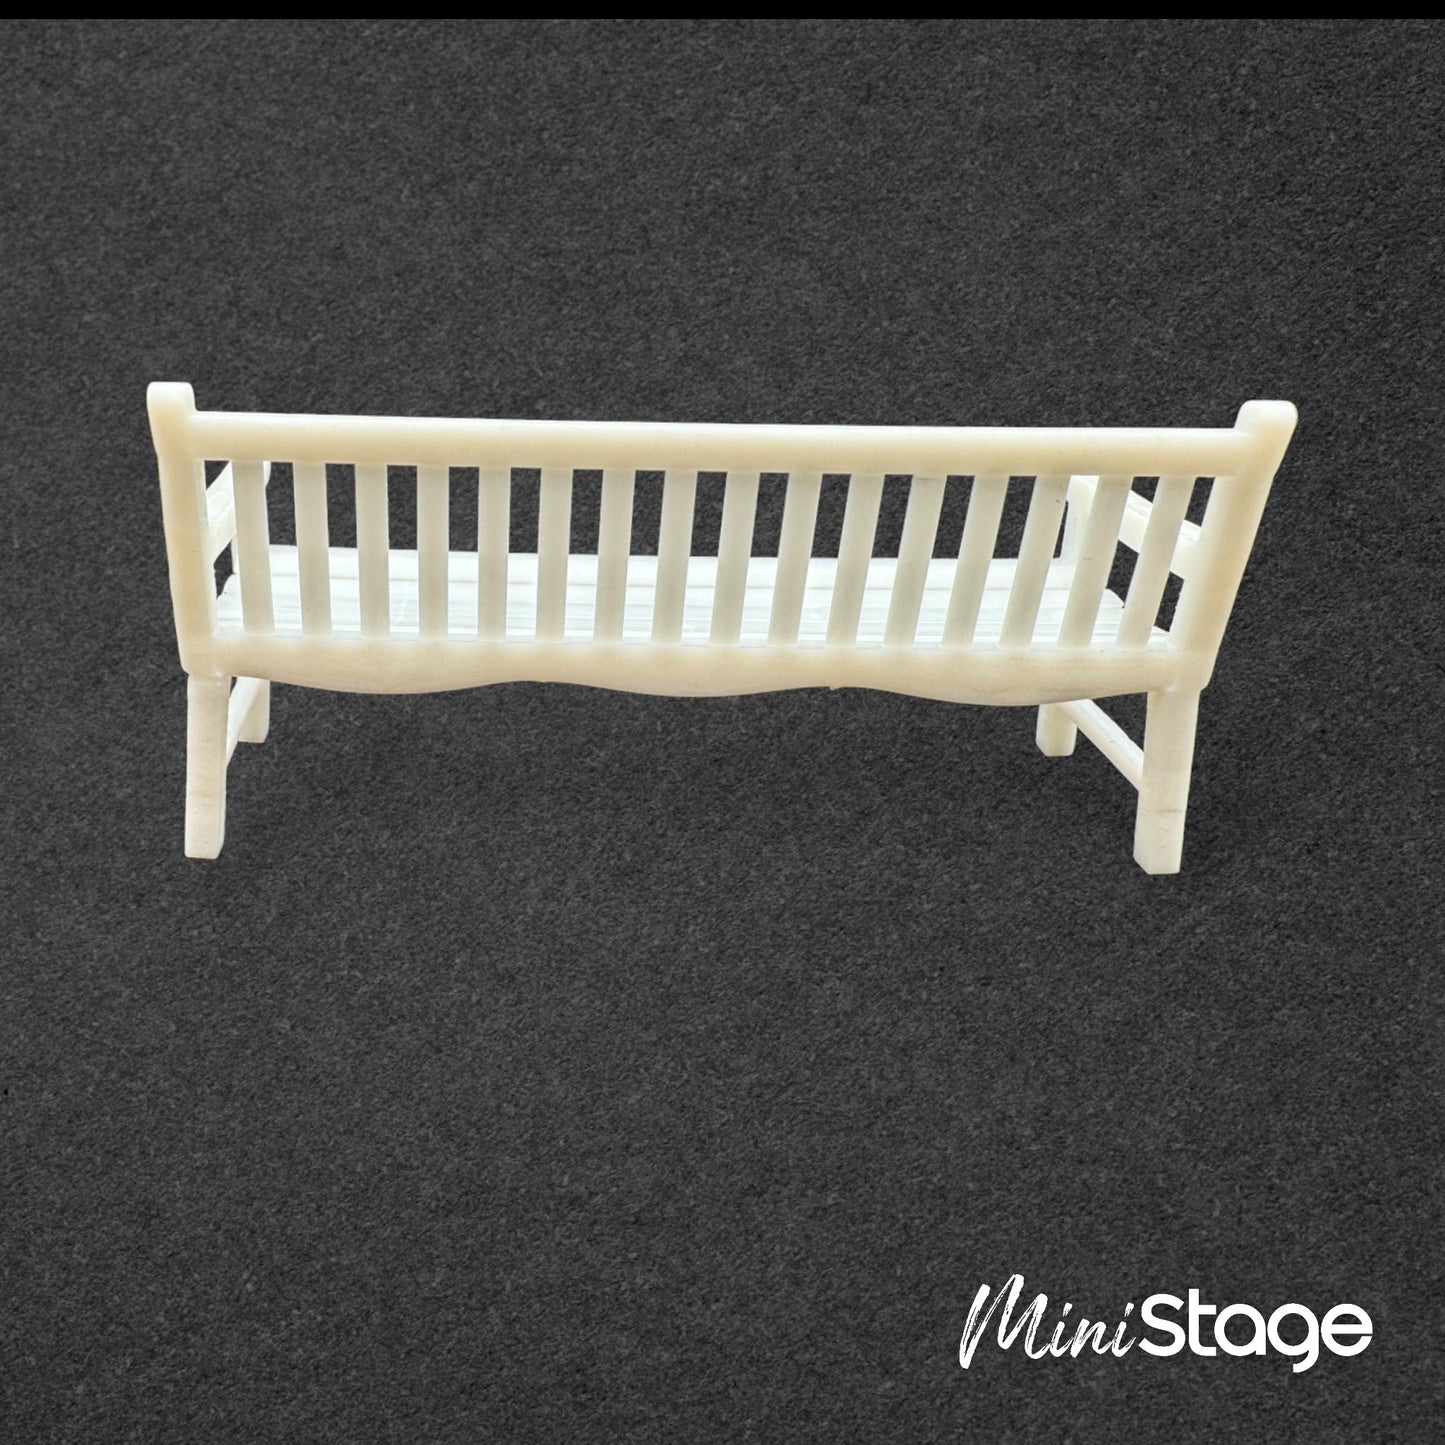 Scale model of a Park Bench